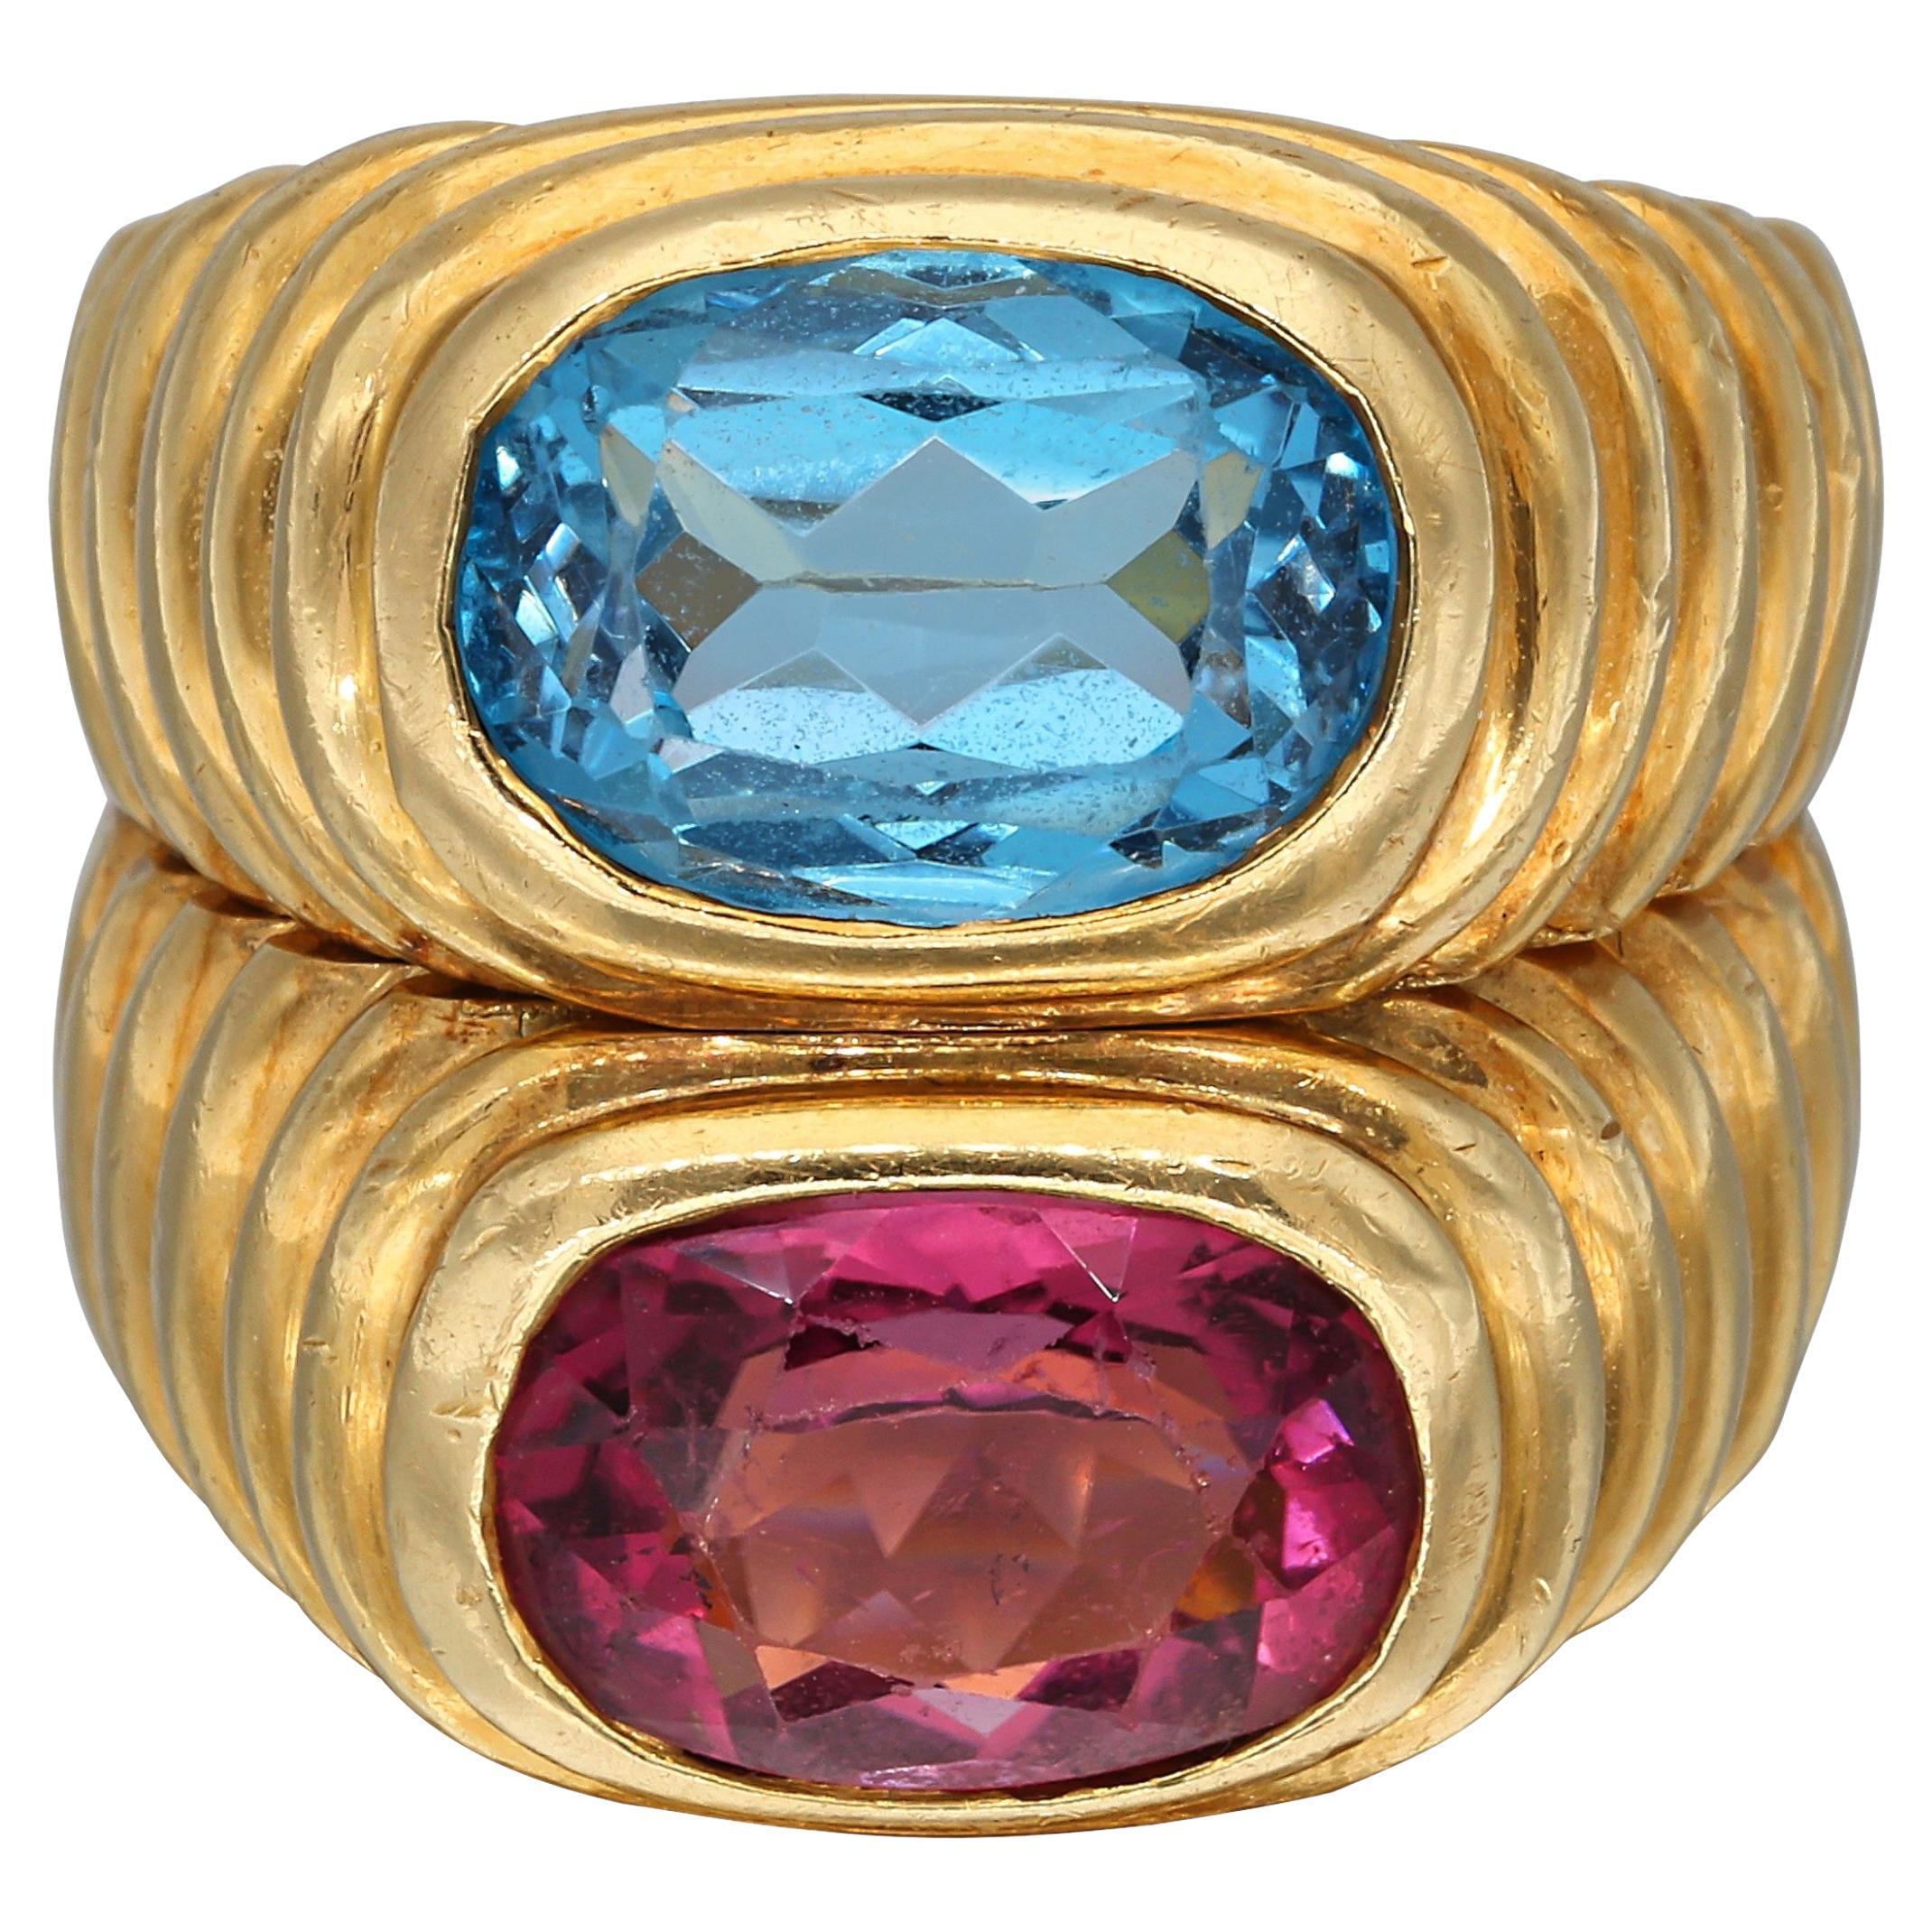 Gold, Topaz, and Tourmaline Ring